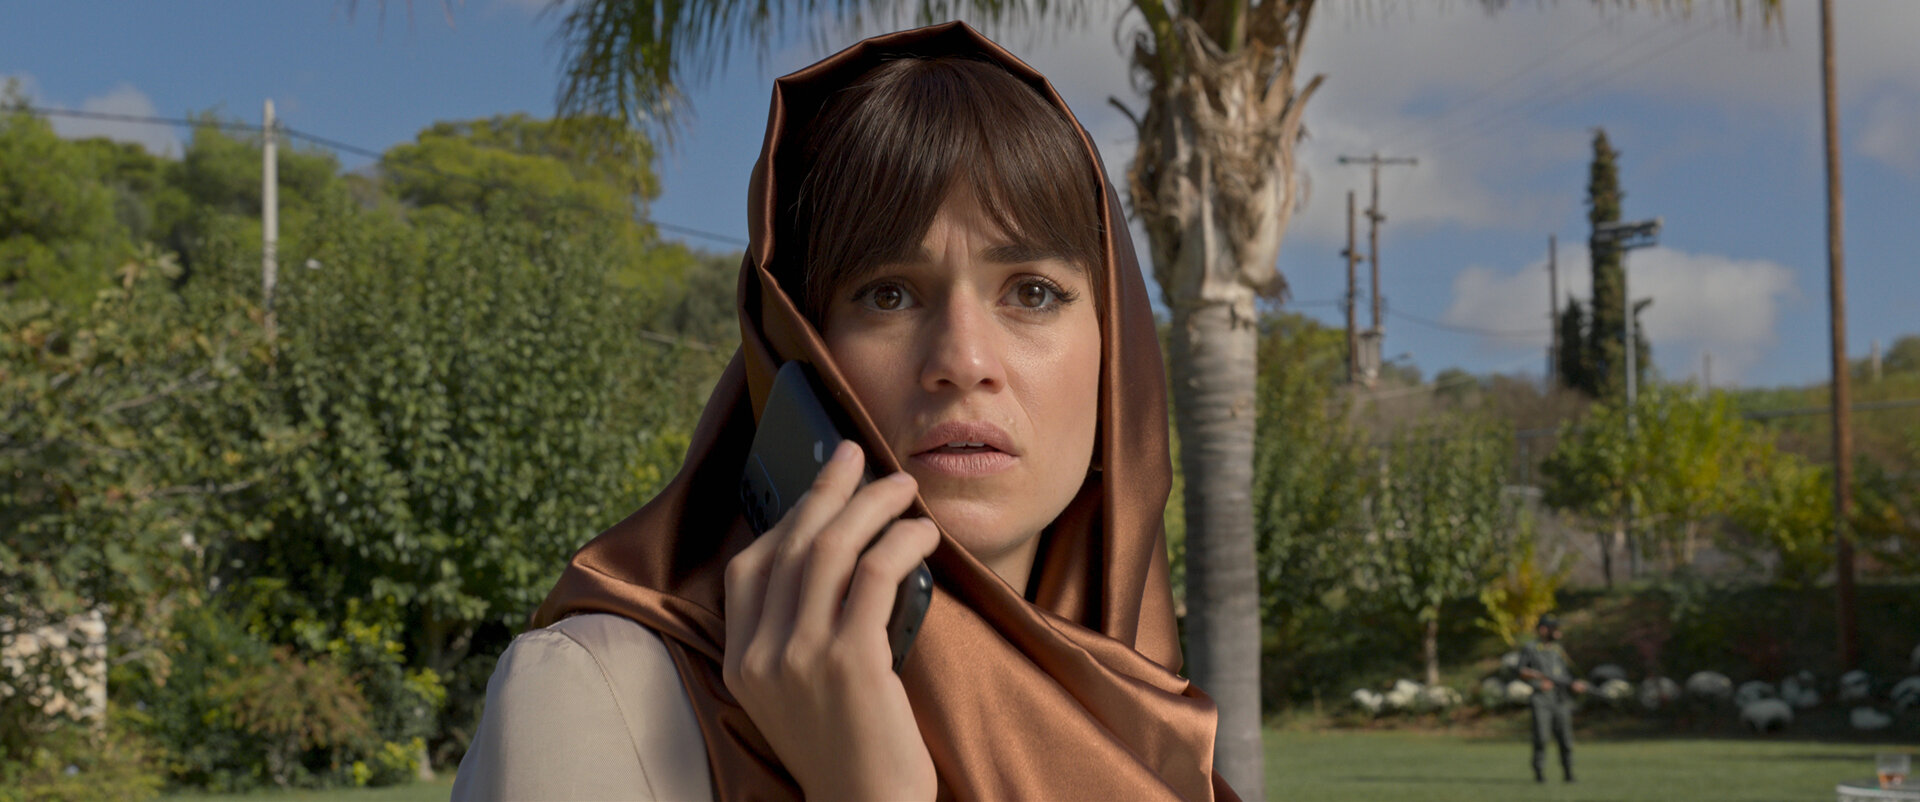 If you love spy shows, Tehran should be on Apple TV Plus